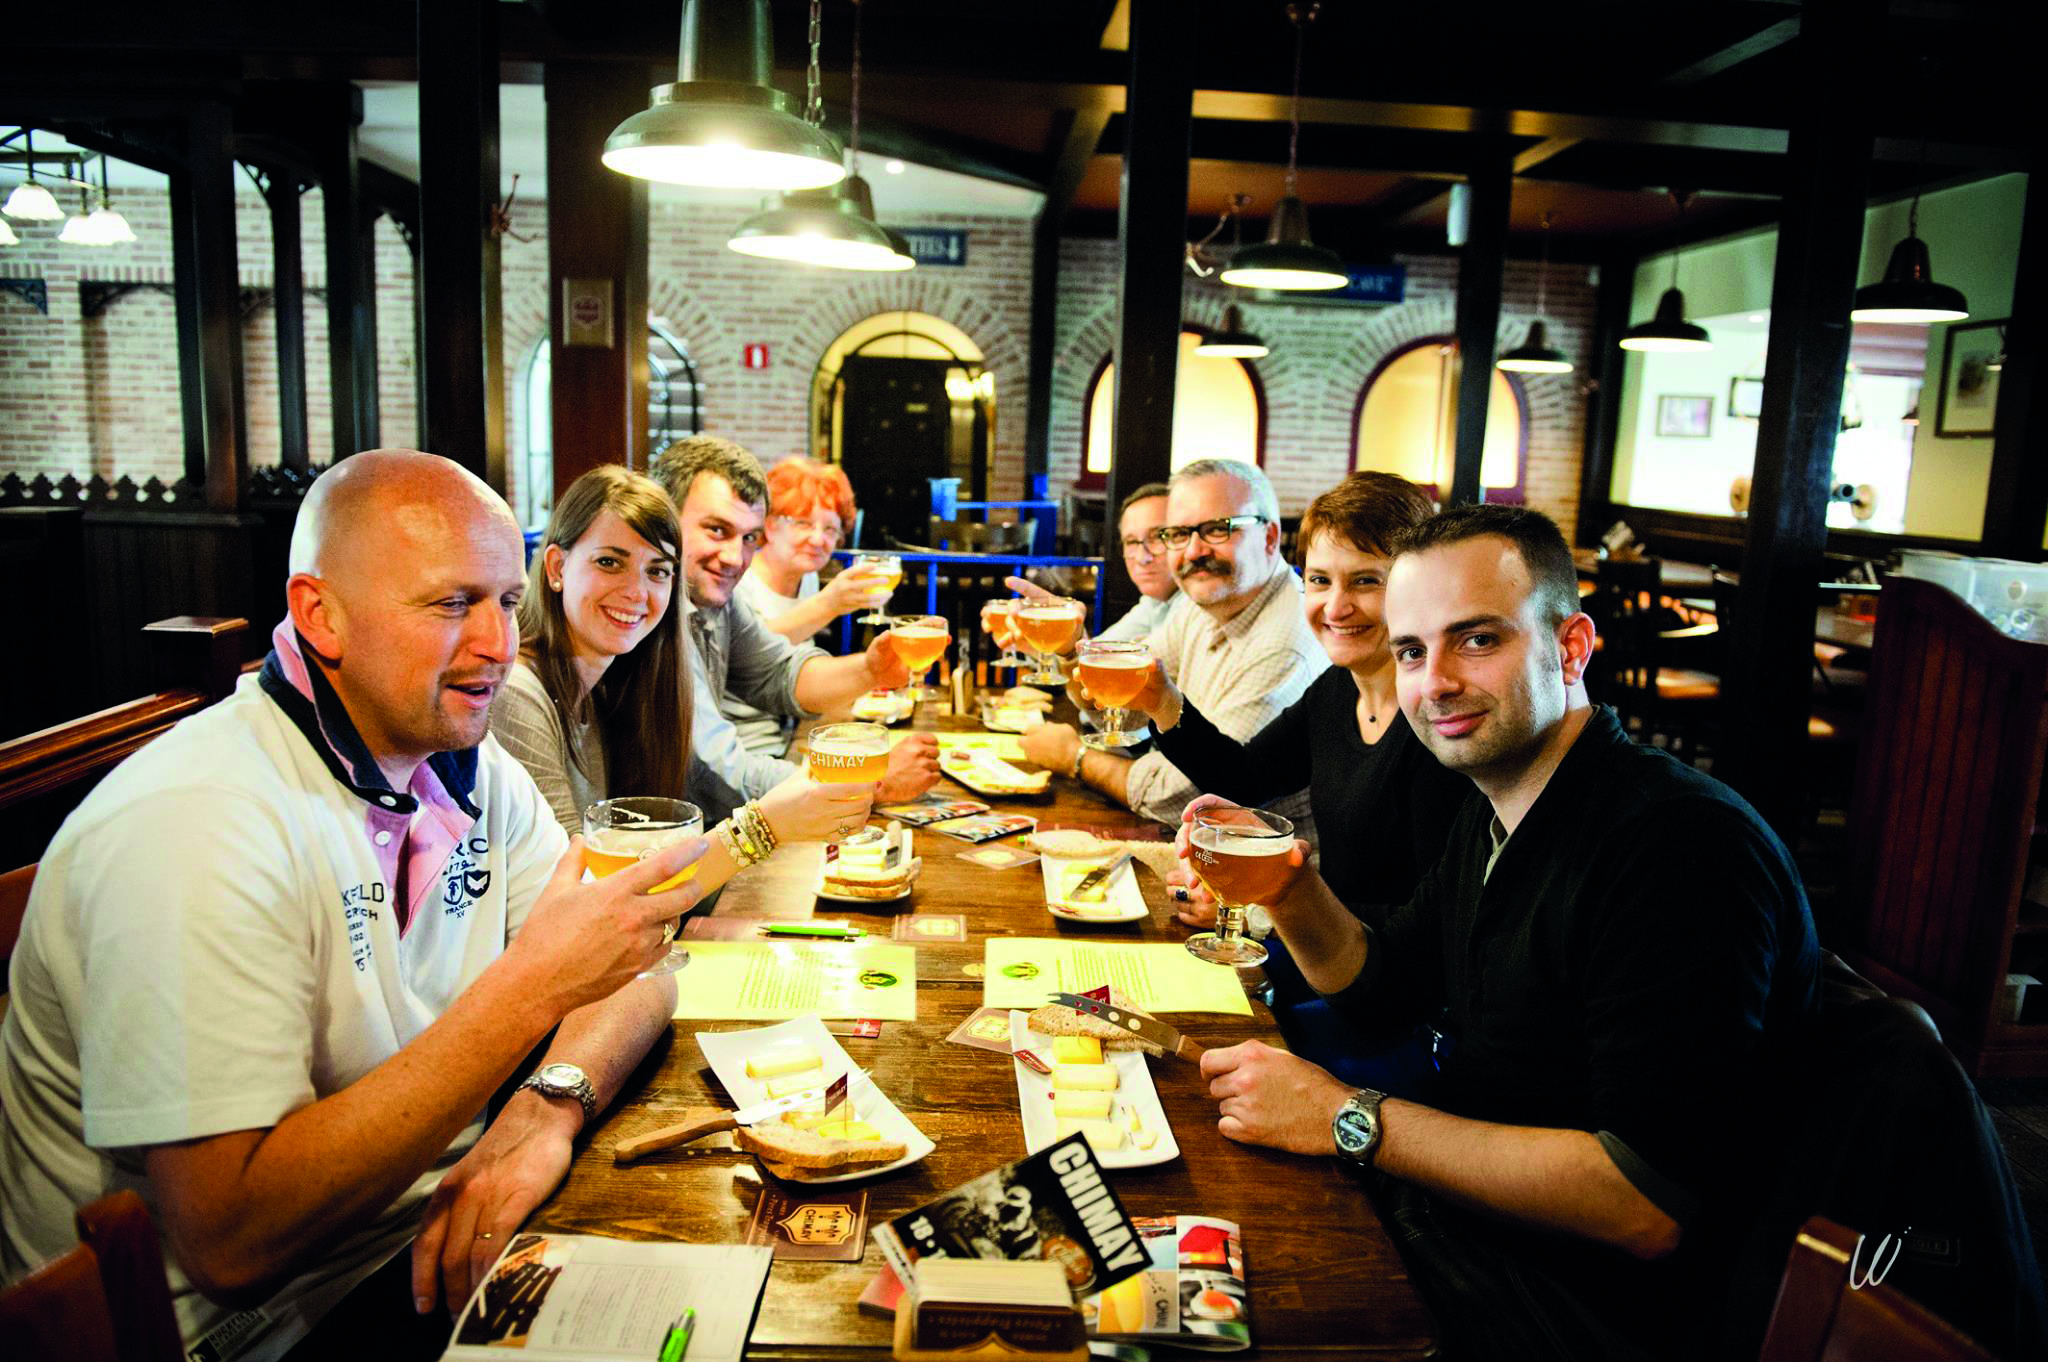 Group of friends toasting with some Chimay beer durin a meal at L'Auberge de Poteaupré restaurant